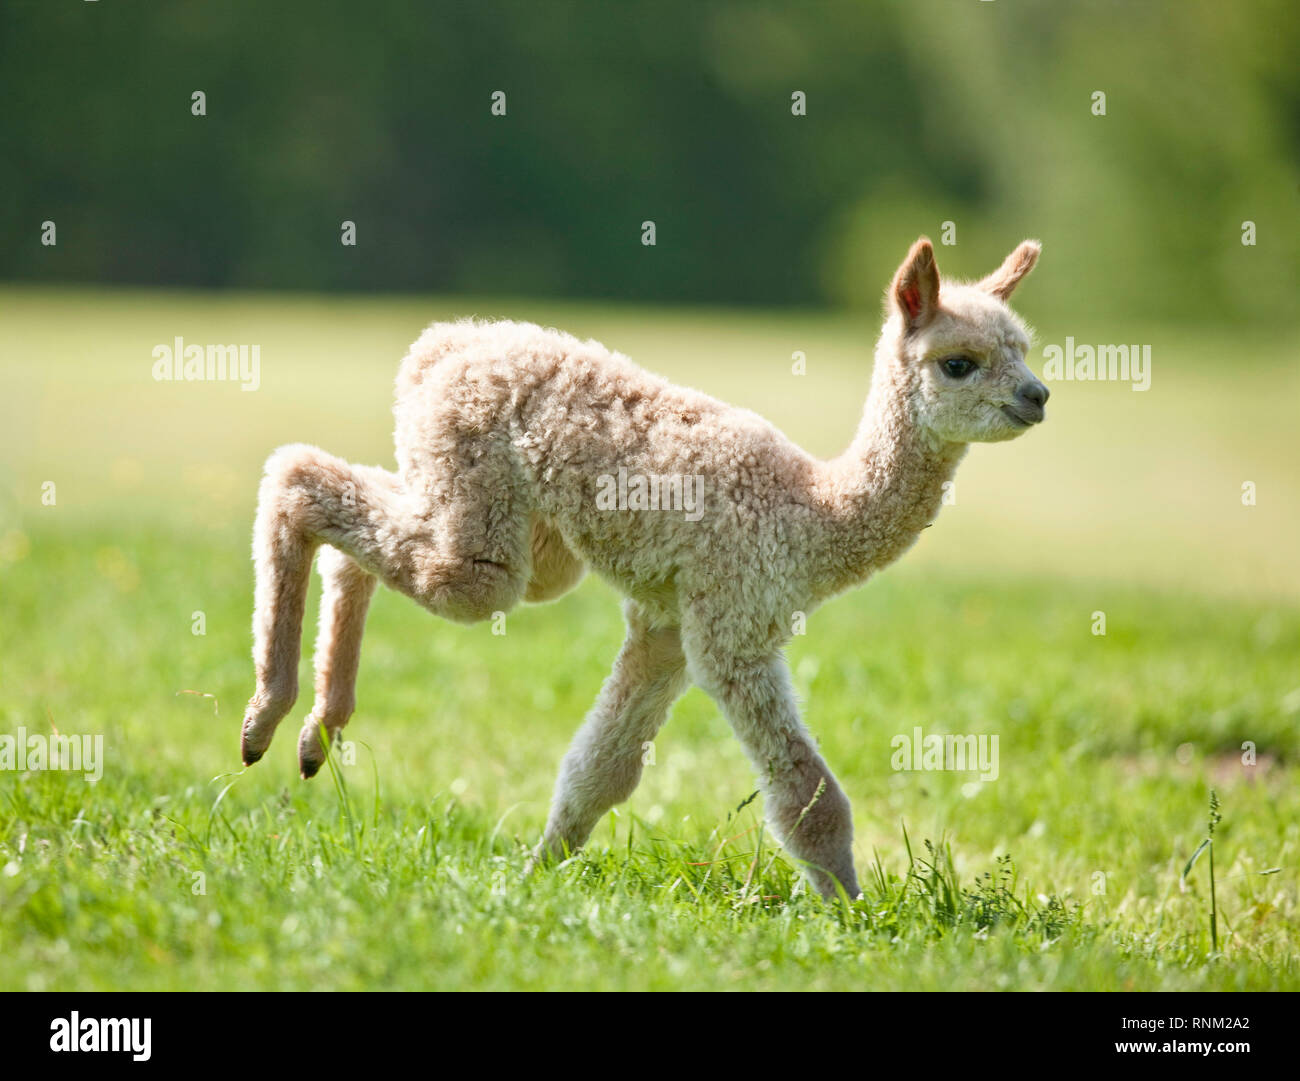 Alpaca (Vicugna pacos). Cria running on a meadow. Germany Stock Photo